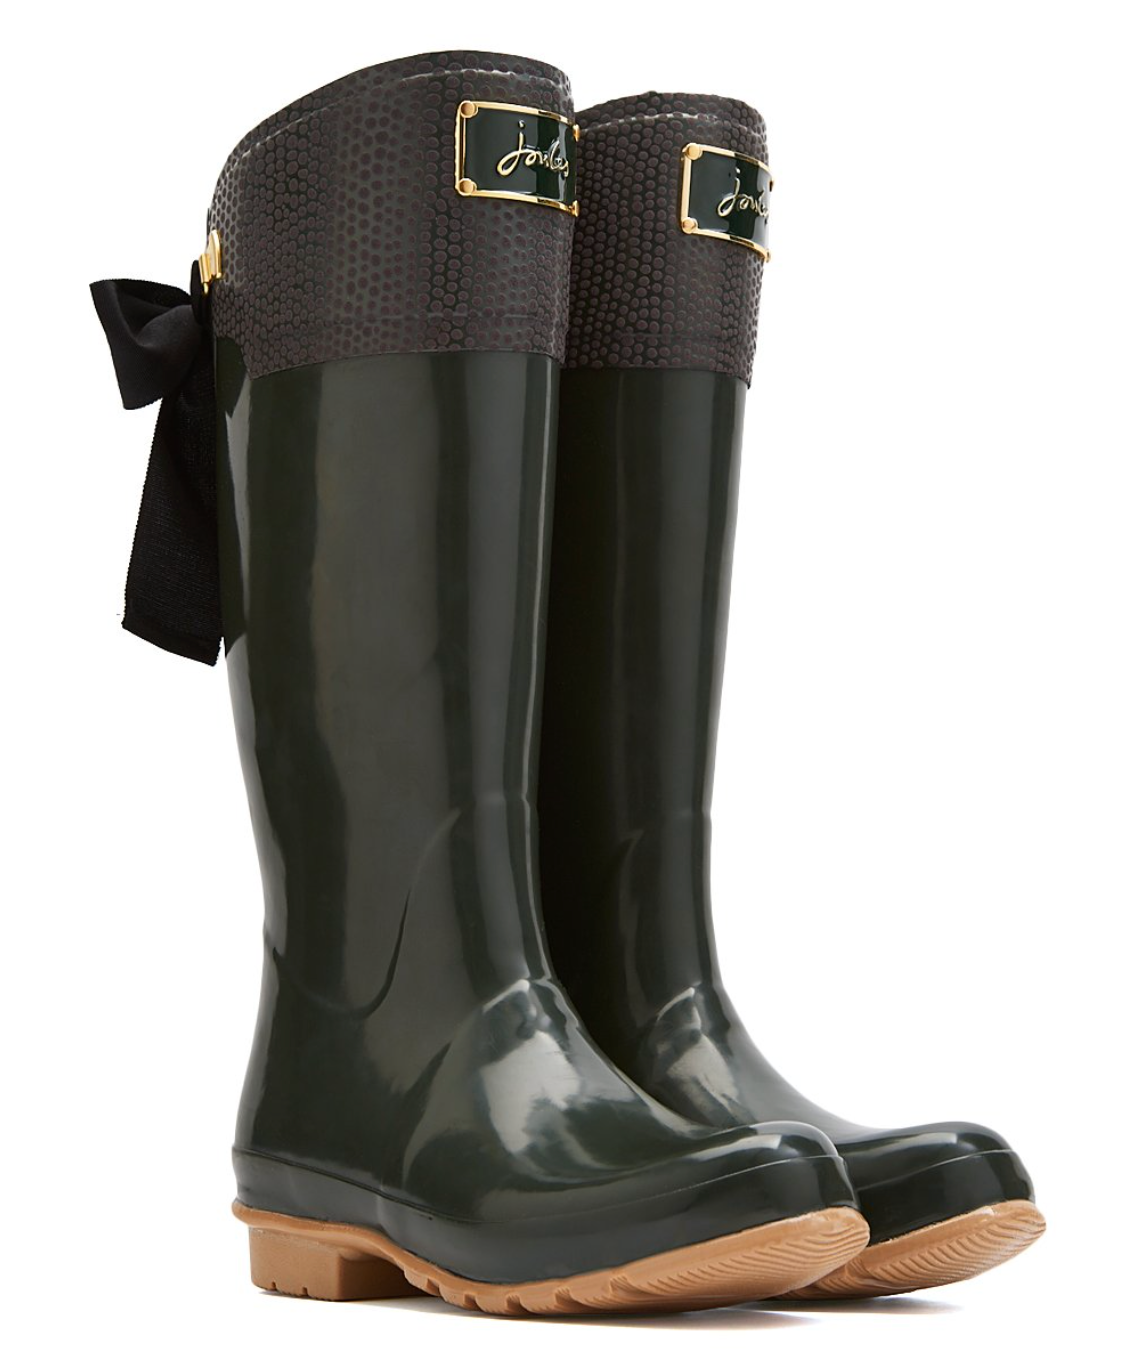 Joules Tall rainboots Black w gold Bow and burgundy Cap